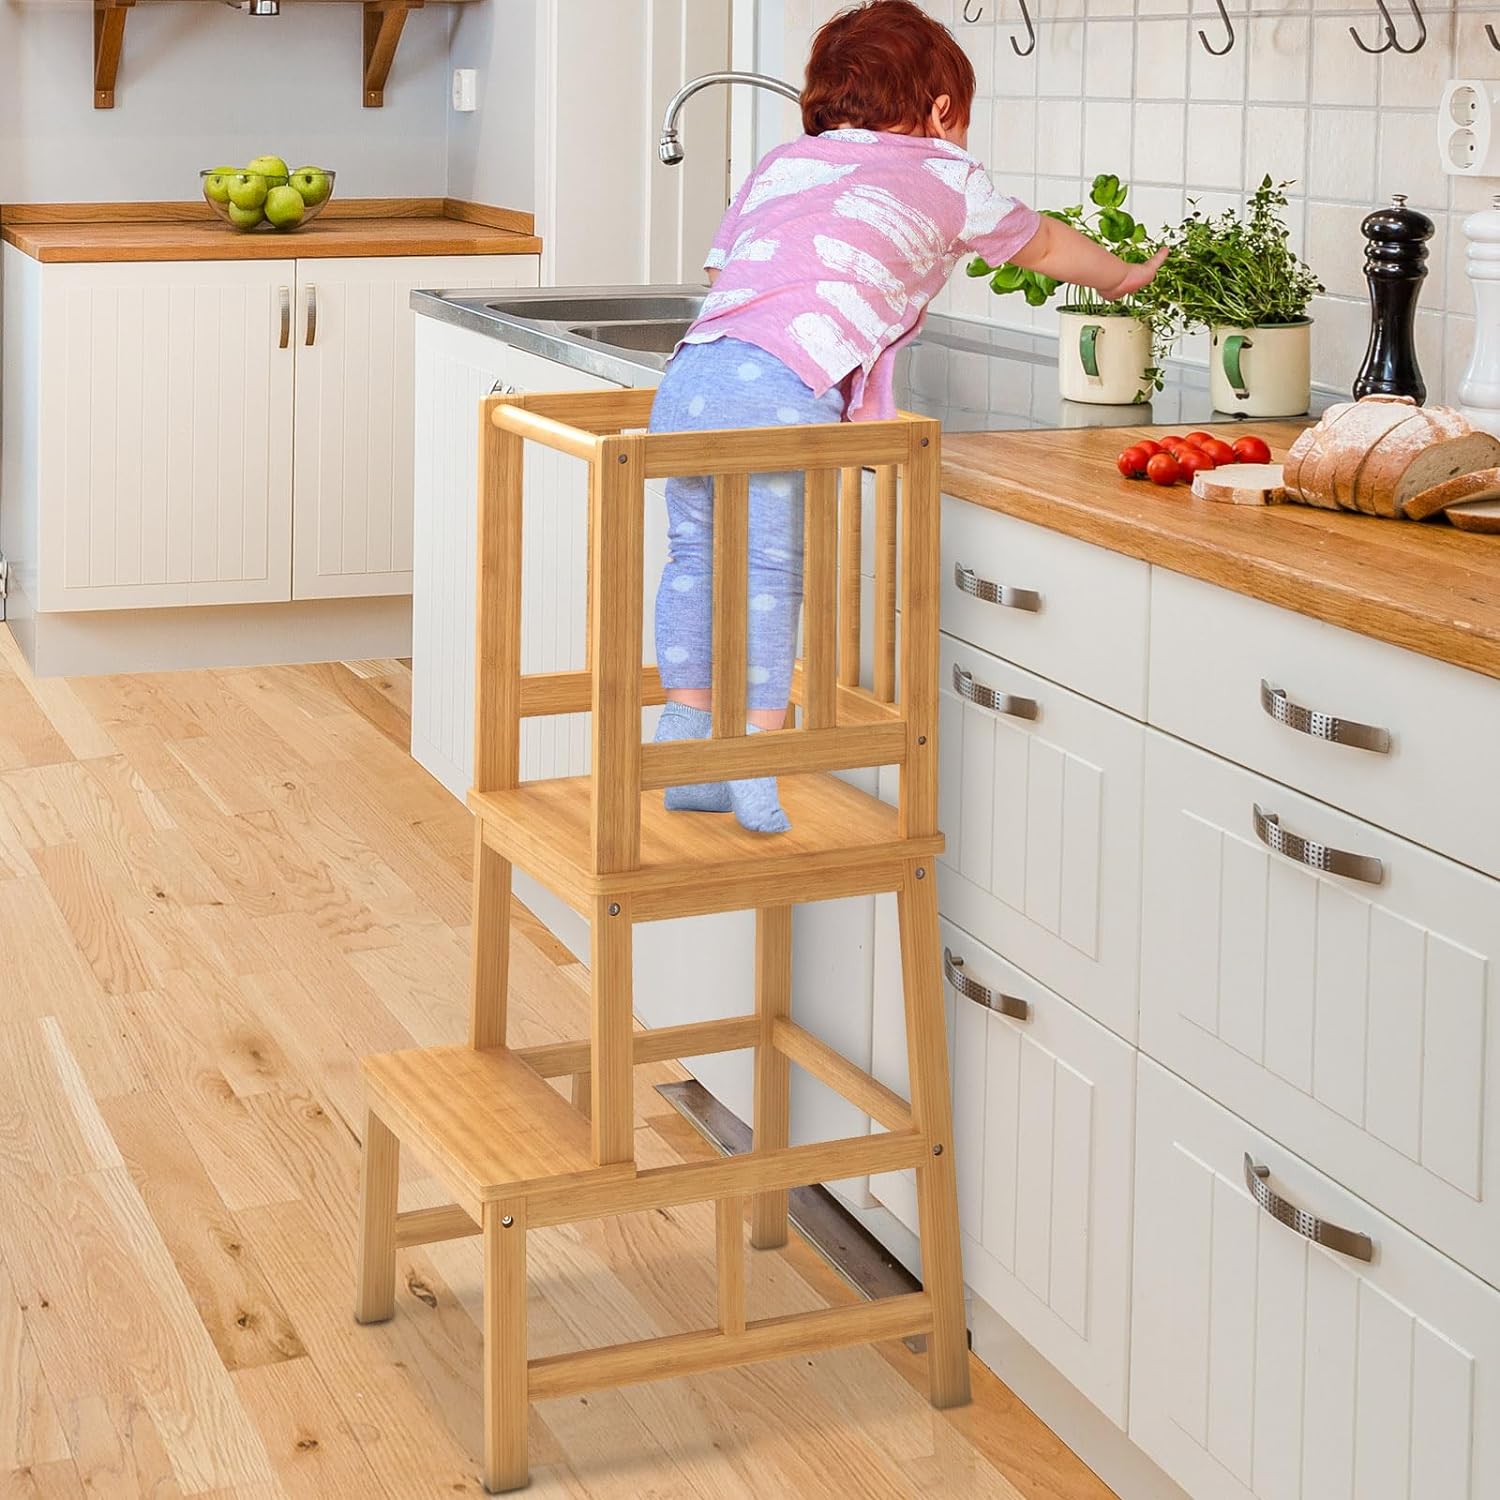 COSYLAND Kitchen Nursery Step Stool: A Safe and Empowering Addition for Your Child Introducing the COSYLAND Kitchen Nursery Step Stool, a remarkable addition to your home that not only elevates your child to new heights but also fosters independence, self-esteem, and confidence. This standing tower for kids is designed to be a true mothers' helper, ensuring that your child is safely by your side during cooking or while performing other activities. Let's delve into the features and benefits that make this learning stool a top choice for parents. Multifunctional Design The COSYLAND standing tower is a versatile piece of equipment. It empowers your child by raising them to the height of the work surface, allowing them to actively participate in cooking and other household tasks. As your little one accompanies you, they learn essential life skills and develop a sense of independence and self-confidence. Beyond the kitchen, this toddler standing tower can be placed in the bathroom, encouraging children to brush their teeth independently while reinforcing self-esteem. Solid Bamboo Material The foundation of this learning stool is crafted from natural bamboo material, making it not only durable but also structurally superior to conventional plastic or wooden stools. To ensure its safety and hygiene, it is thoughtfully coated with a smooth, non-toxic, lead-free finish. The choice of bamboo aligns with sustainability, as it's a renewable resource that adds an eco-friendly touch to your home. Safety First with Anti-Slip Design COSYLAND places paramount importance on safety. The kitchen stool features a clever "A" shape design, enveloped by four-sided safety rails, ensuring your child remains secure at all times. The four corners of the step stool are equipped with robust non-slip silicone mats, effectively minimizing the risk of slipping or falling. You can be confident that your child is protected while exploring their newfound independence. Easy Installation and Support Worried about assembly? Don't be. The COSYLAND Kitchen Nursery Step Stool comes with all the necessary installation tools, and each part, including screws, is conveniently numbered for straightforward assembly. If you encounter any challenges during setup, our support team is readily available to provide guidance and assistance. We are here to ensure your child's safety and your peace of mind. Impressive Load-Bearing Capacity This kitchen nursery helper is suitable for toddlers aged 18 months to 3 years and boasts an impressive load-bearing capacity of 150 lbs. In fact, our product has been professionally tested and has demonstrated the strength to bear the weight of an adult. You can rest assured that this learning stool will stand the test of time, adapting to your child's developmental needs. In conclusion, the COSYLAND Kitchen Nursery Step Stool is a remarkable addition to your home, offering safety, durability, and endless opportunities for your child to develop essential life skills. Fostering independence, self-esteem, and confidence, this learning stool is a valuable investment in your child's growth. Elevate your child's world with COSYLAND today.